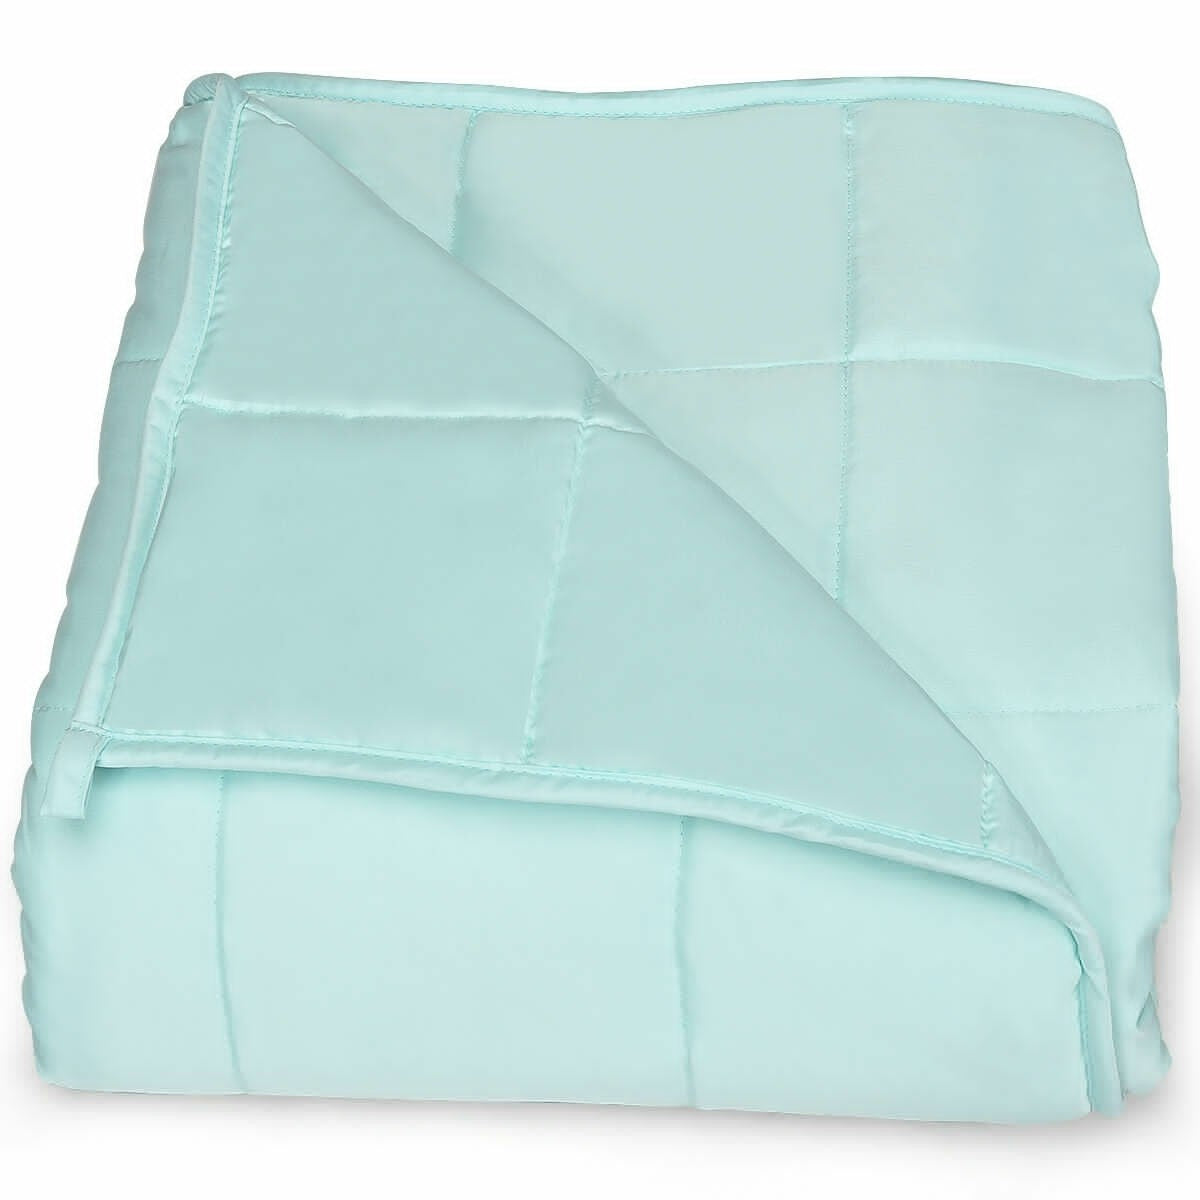 Cooling Weighted Blanket, Luxury Cooling Silk Sewed in Cotton, 41"x60" | 7lbs/10lbs